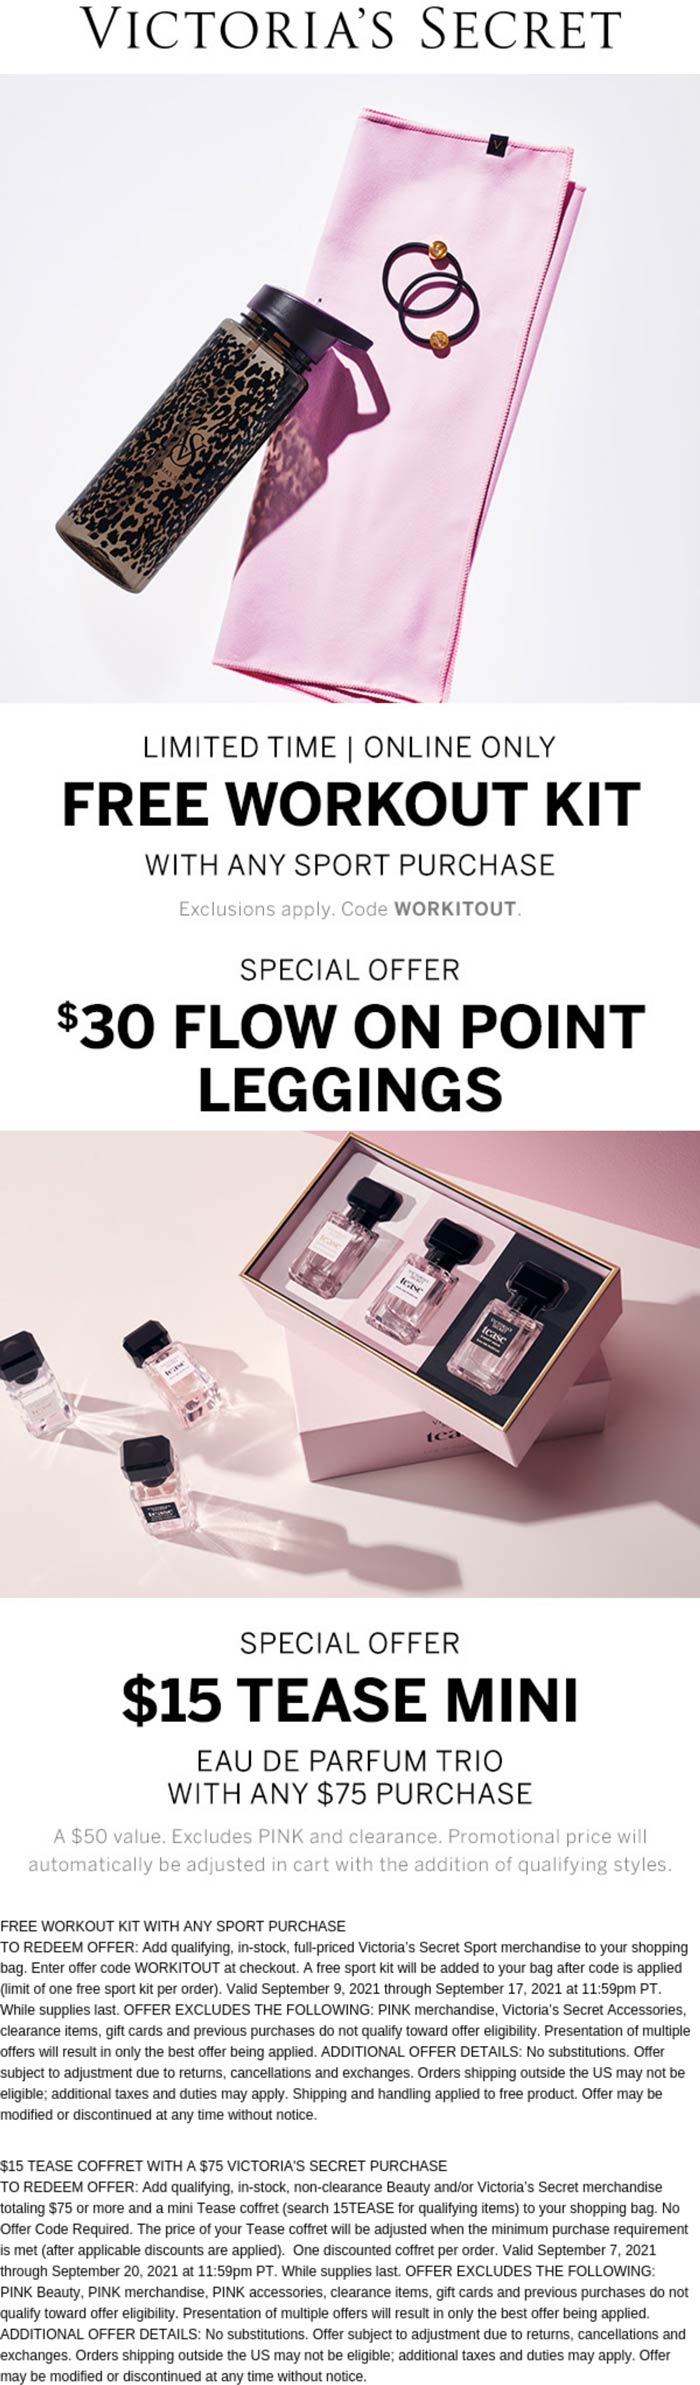 Victorias Secret stores Coupon  Free workout kit with any sport purchase & more at Victorias Secret via promo code WORKITOUT #victoriassecret 